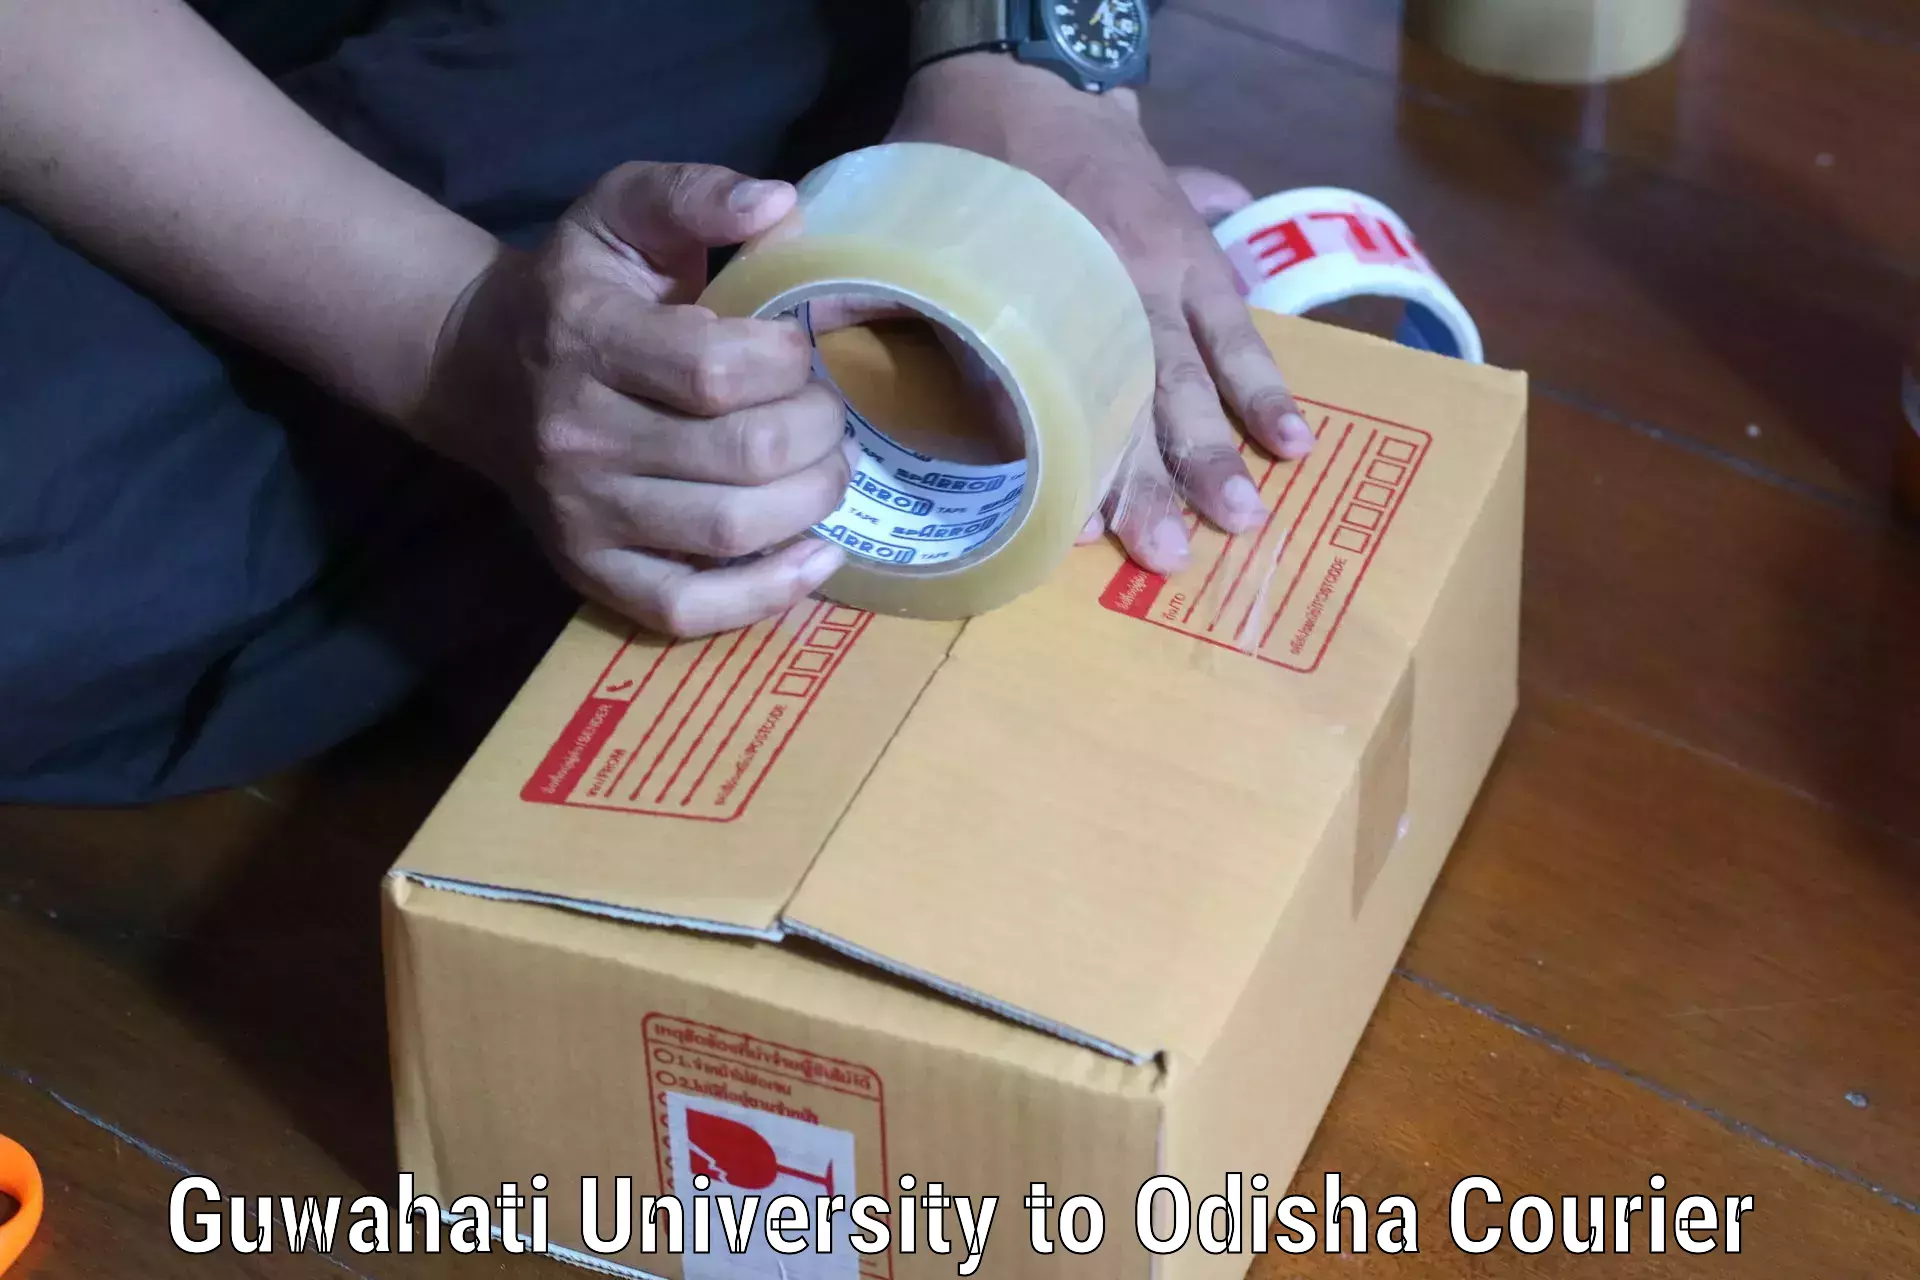 Wholesale parcel delivery Guwahati University to Tihidi